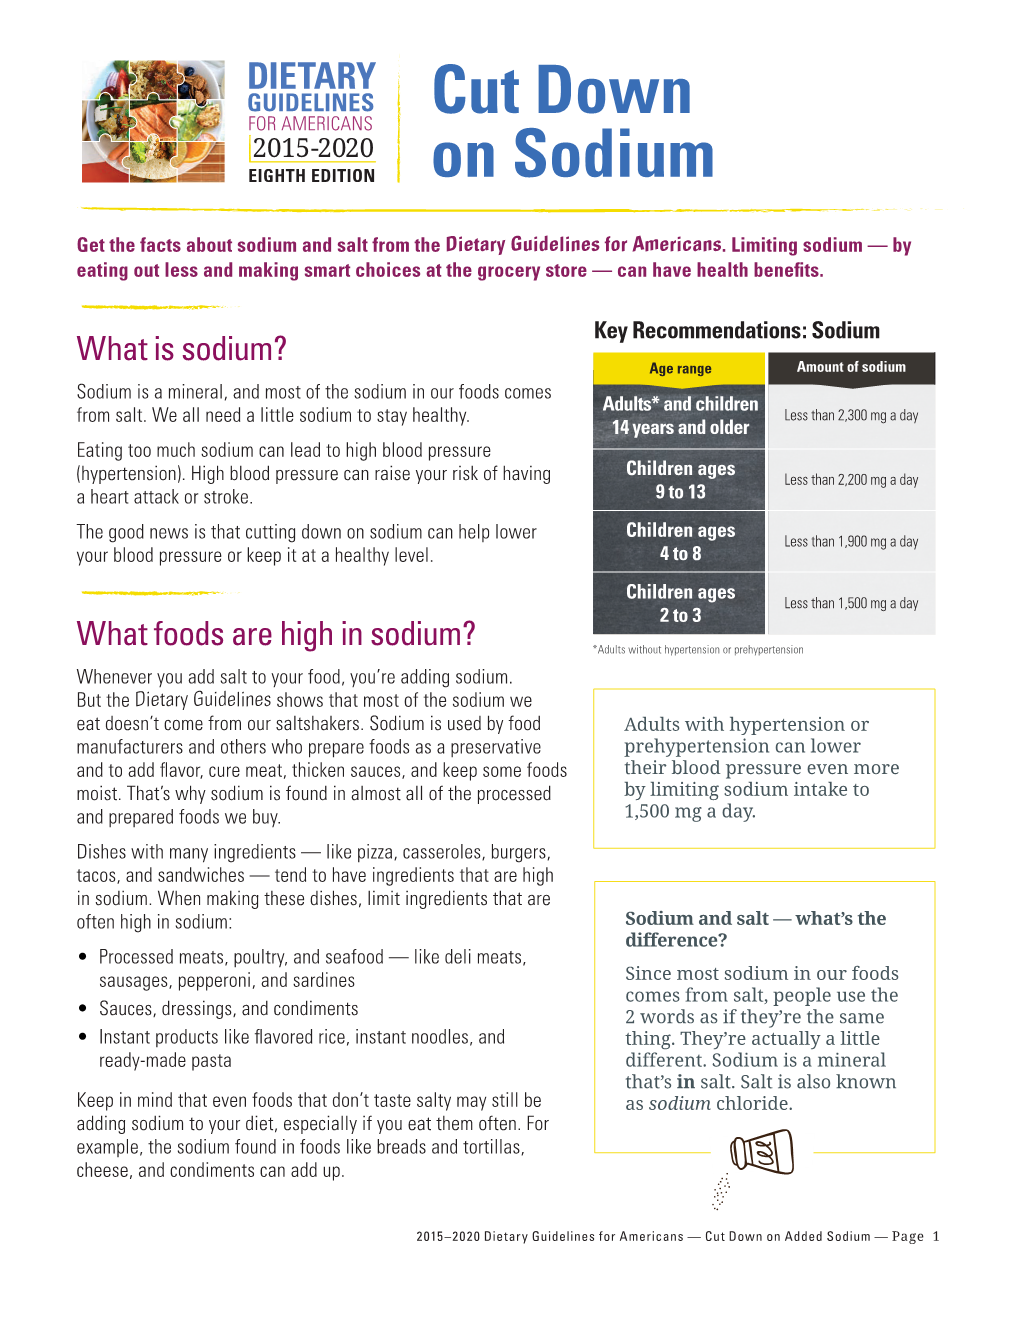 Cut Down on Sodium? Pay Close Attention to the Foods You Choose When You’Re Grocery Shopping and Eating Out